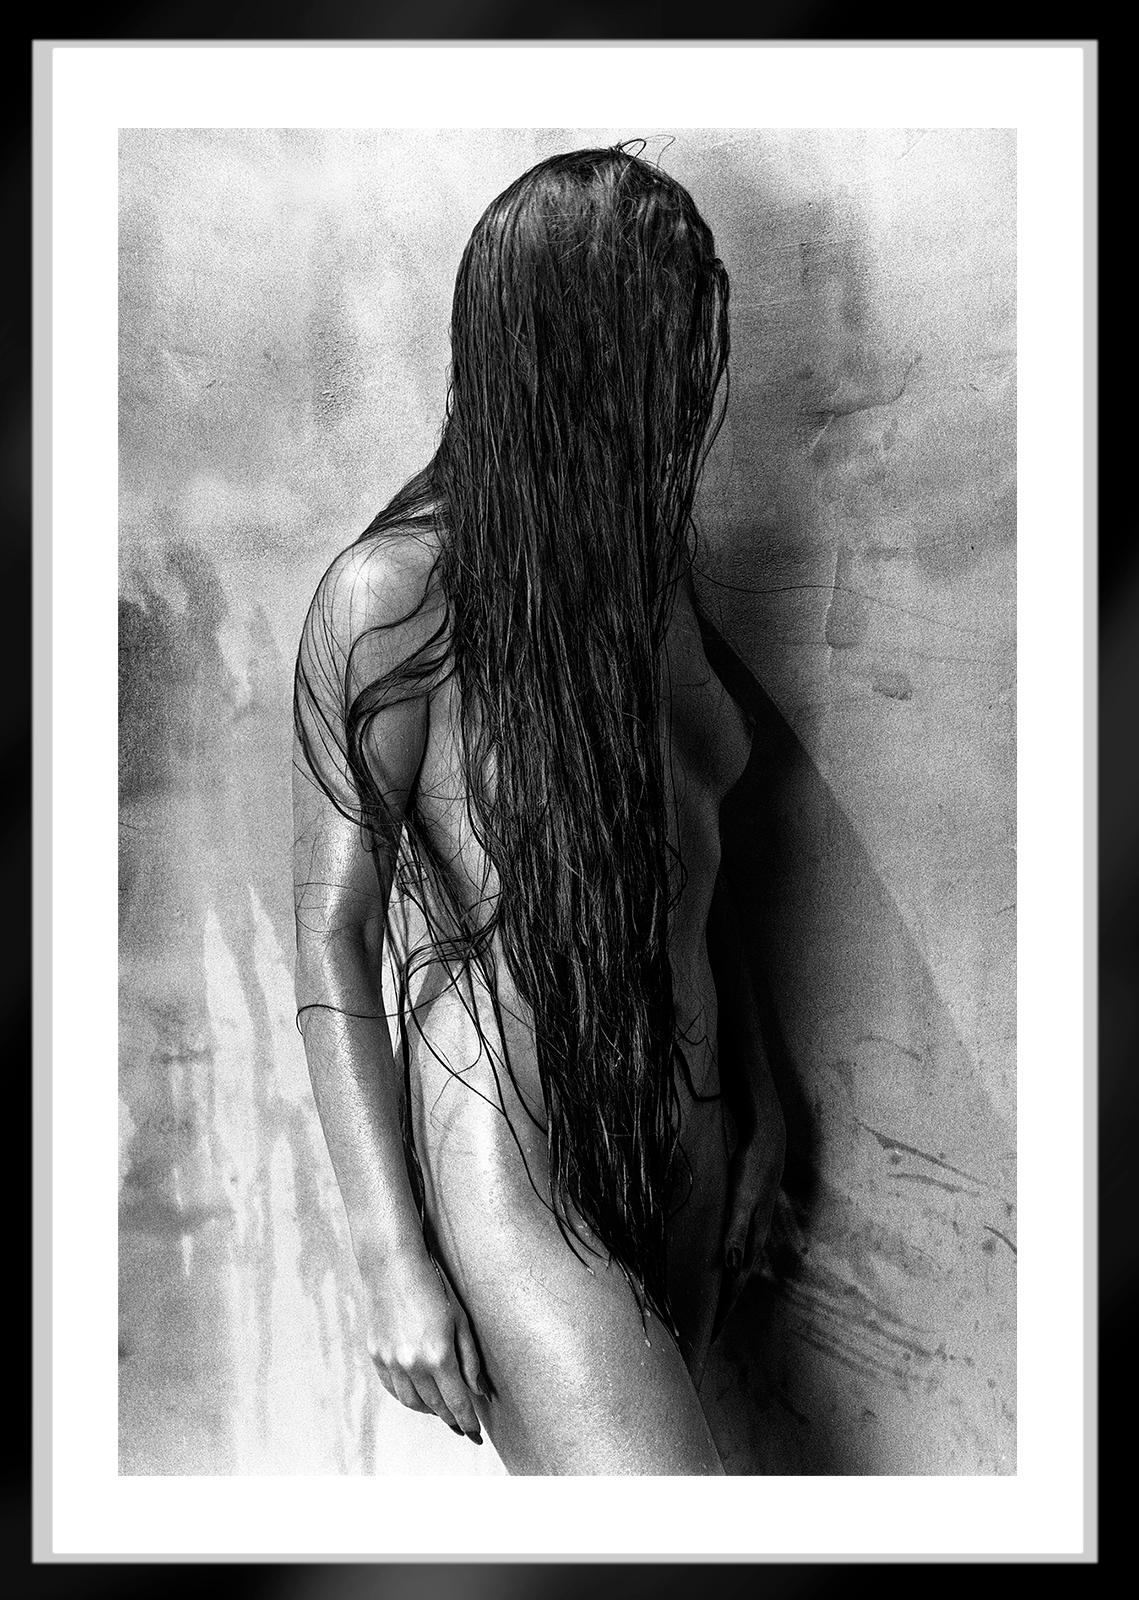  Sarah 2  - Signed limited edition archival pigment print   - Edition of 5
Photographed in Brighton, England in 1989

This image was captured on film. 
The negative was scanned creating a digital file which was then printed on Hahnemühle Photo Rag